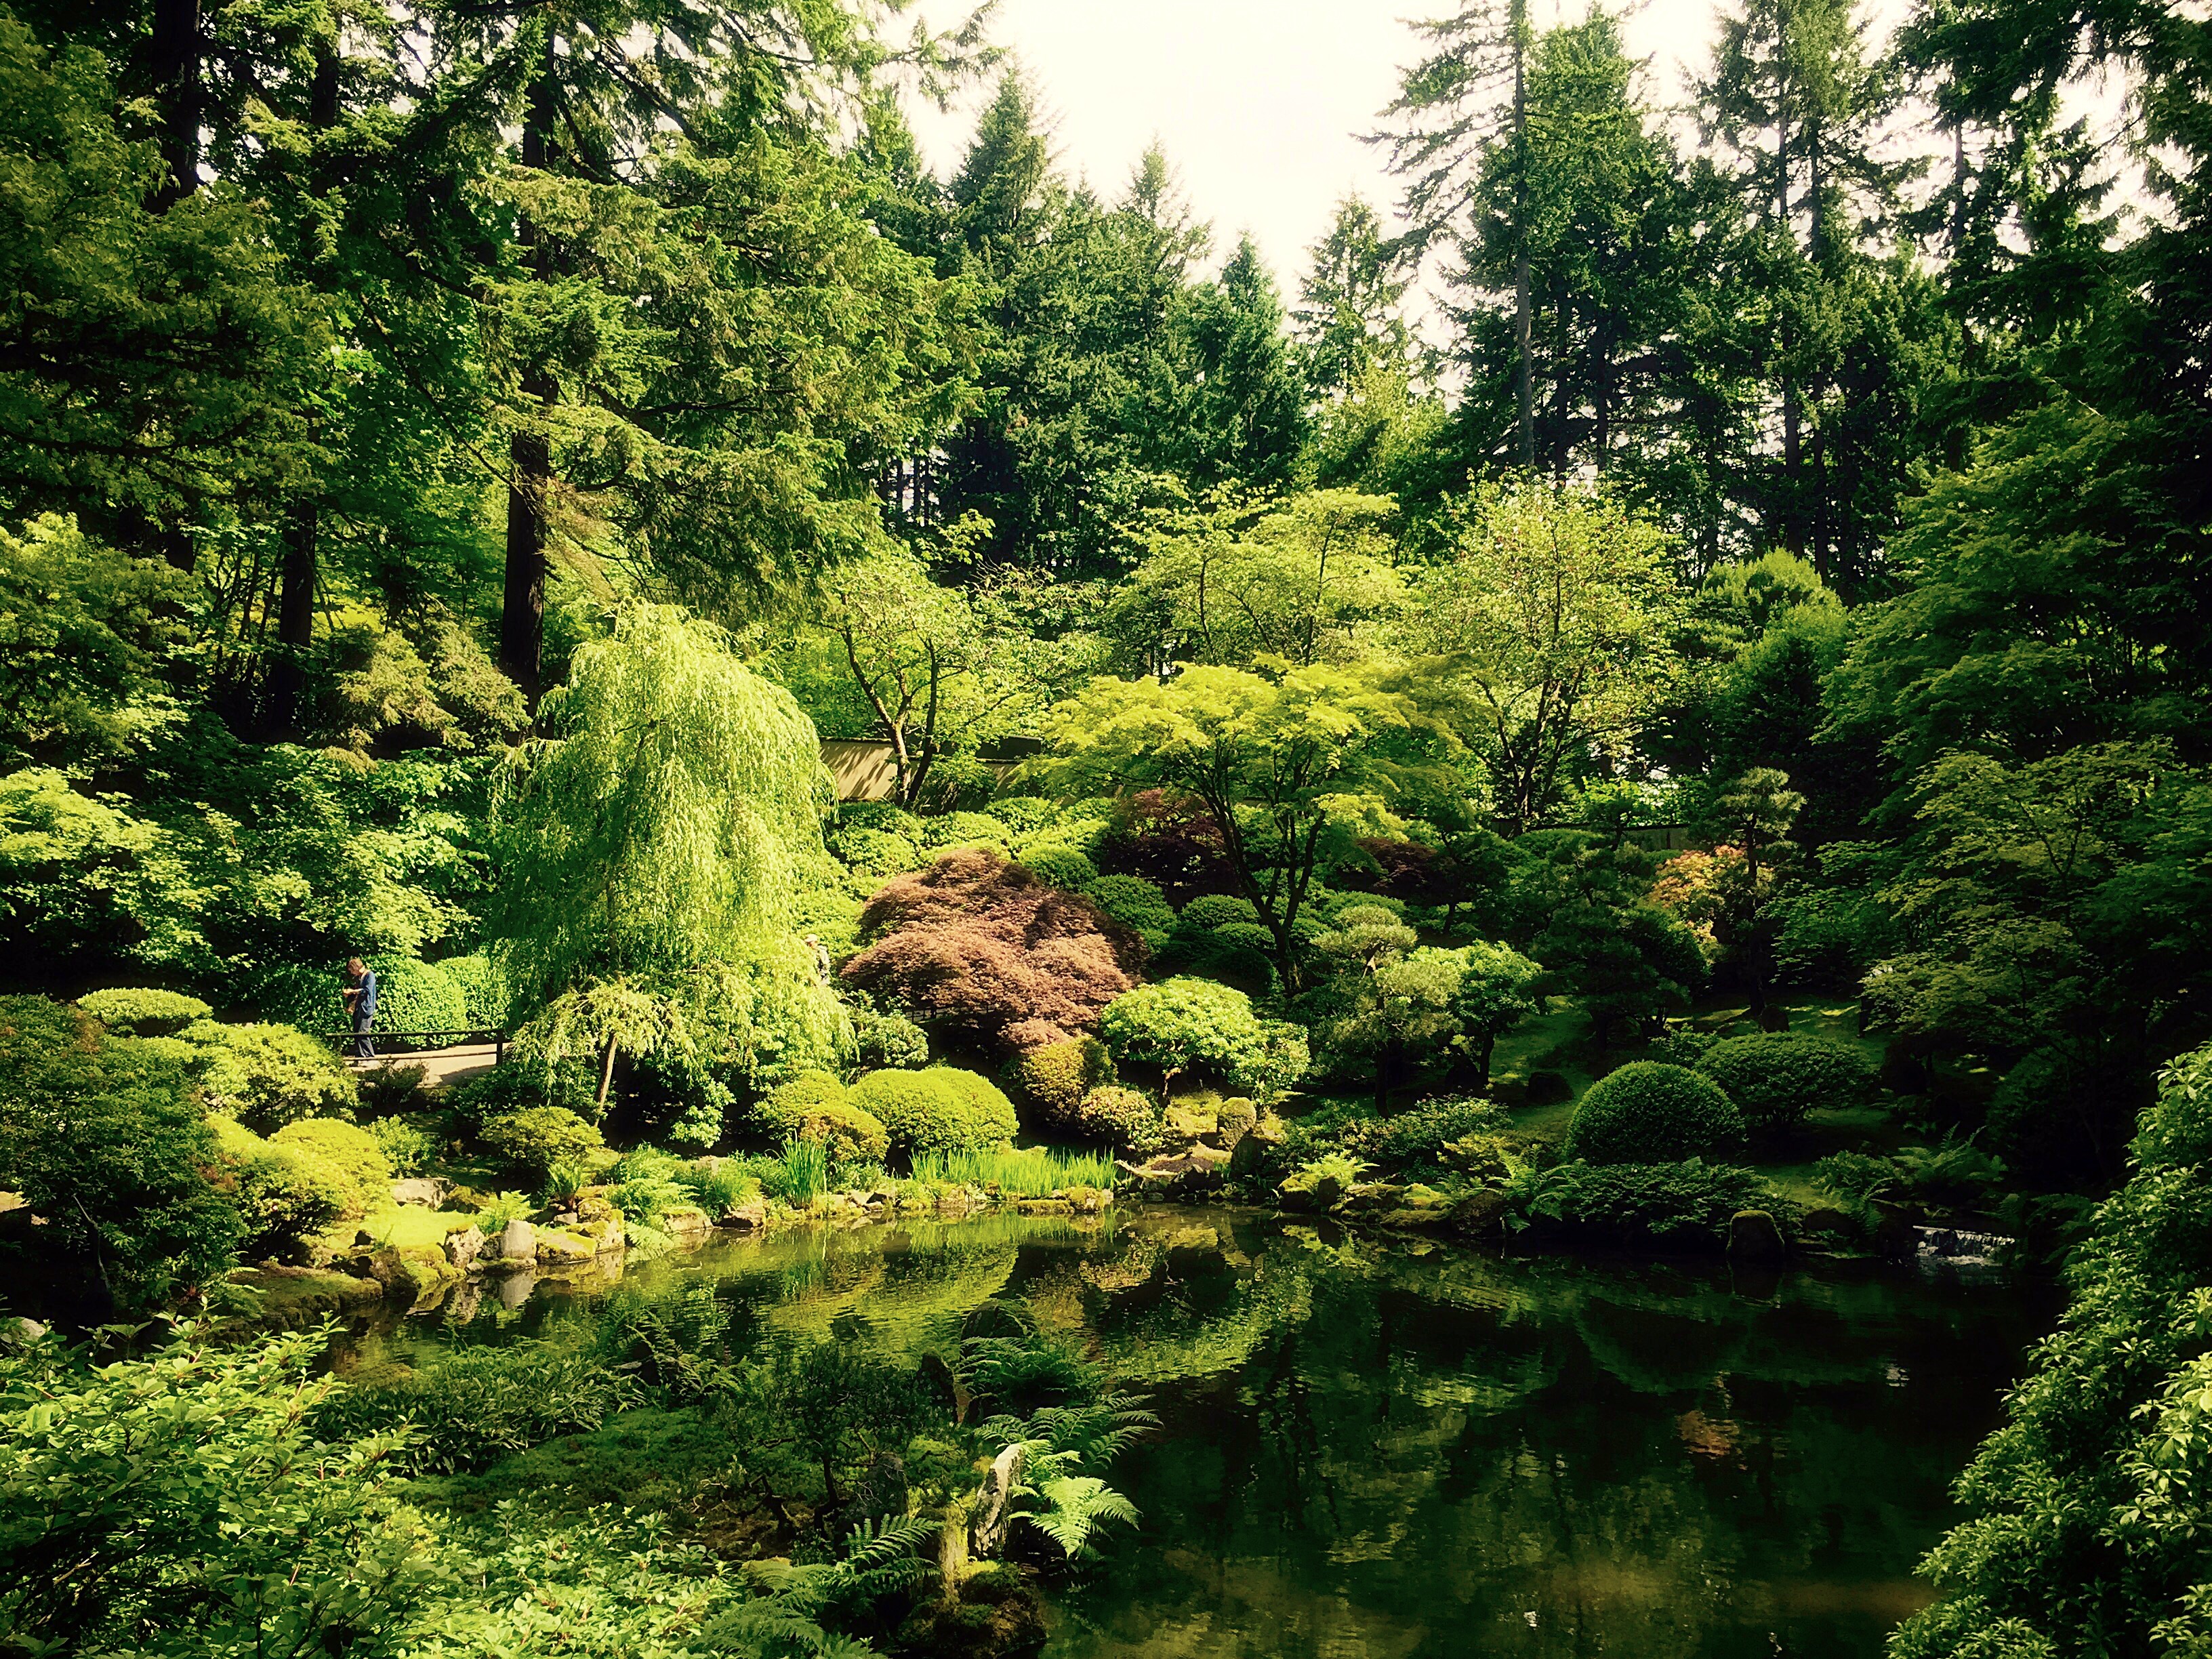 A day at the Japanese gardens